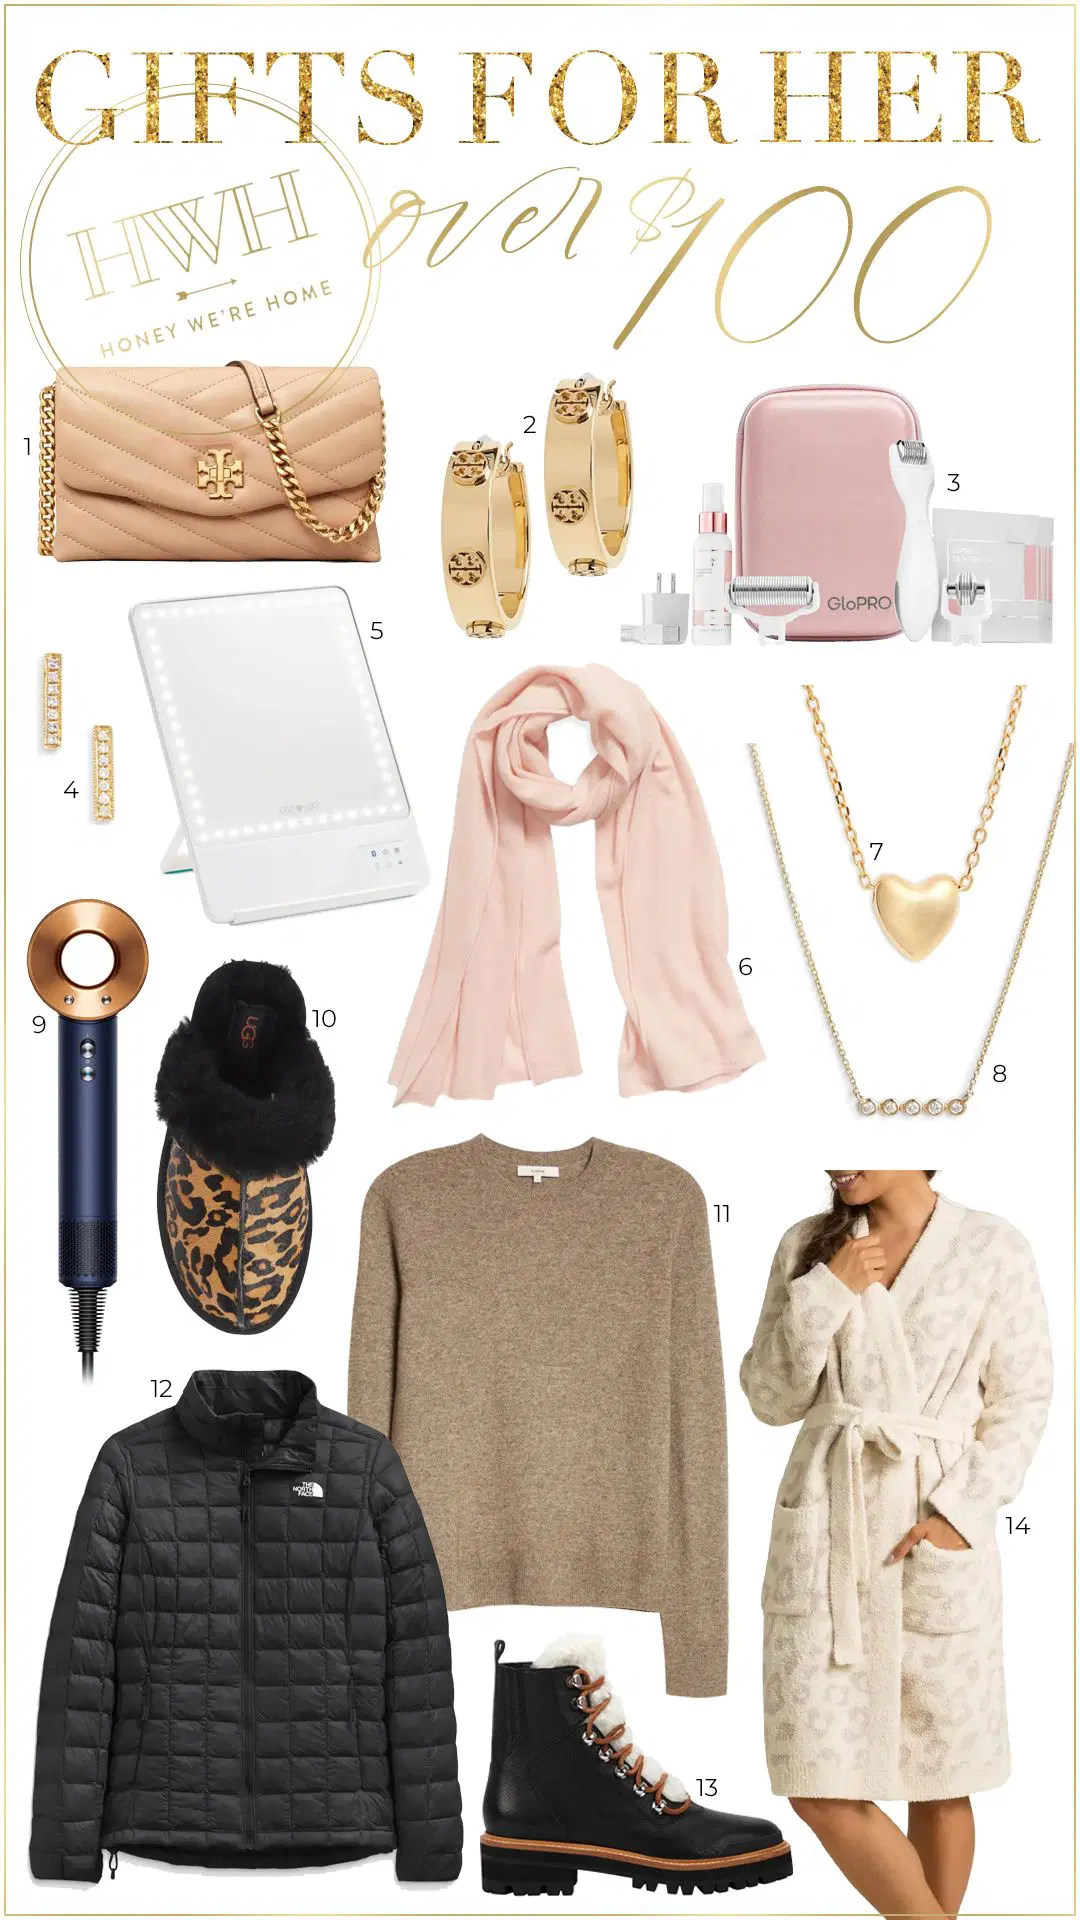 Just the Best Sales, Stocking Stuffers & Gifts for Her Over $100